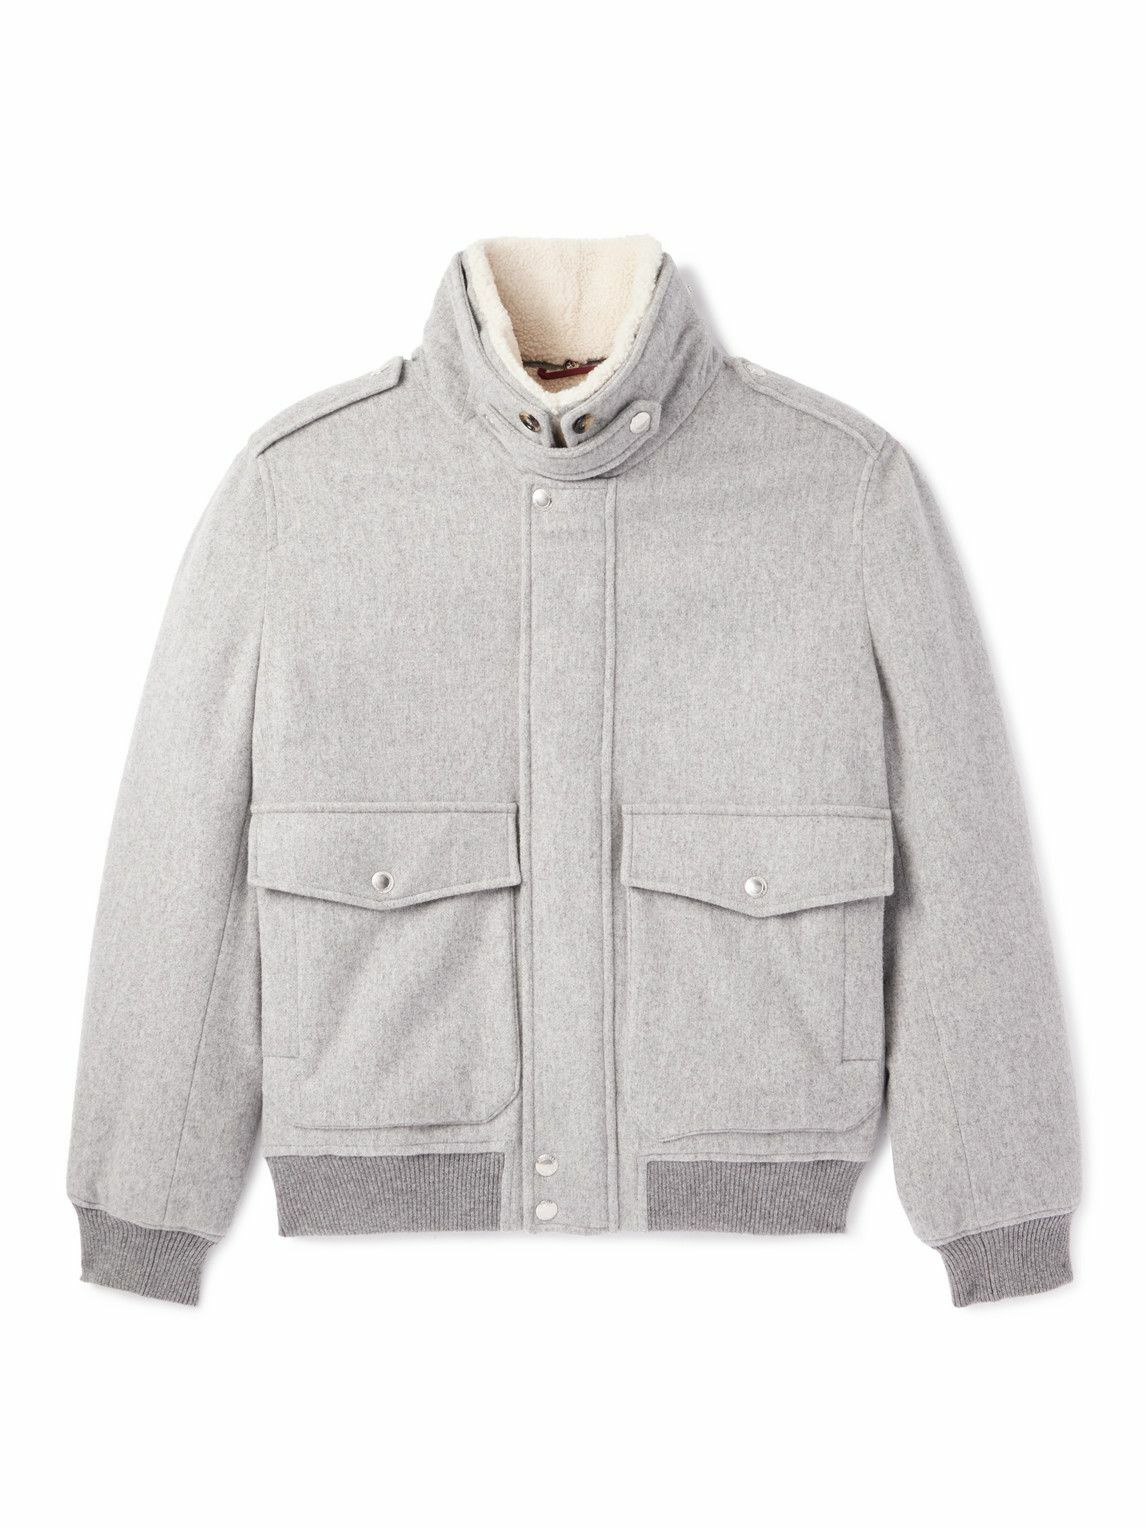 Photo: Brunello Cucinelli - Shearling-Trimmed Cashmere Bomber Jacket - Gray